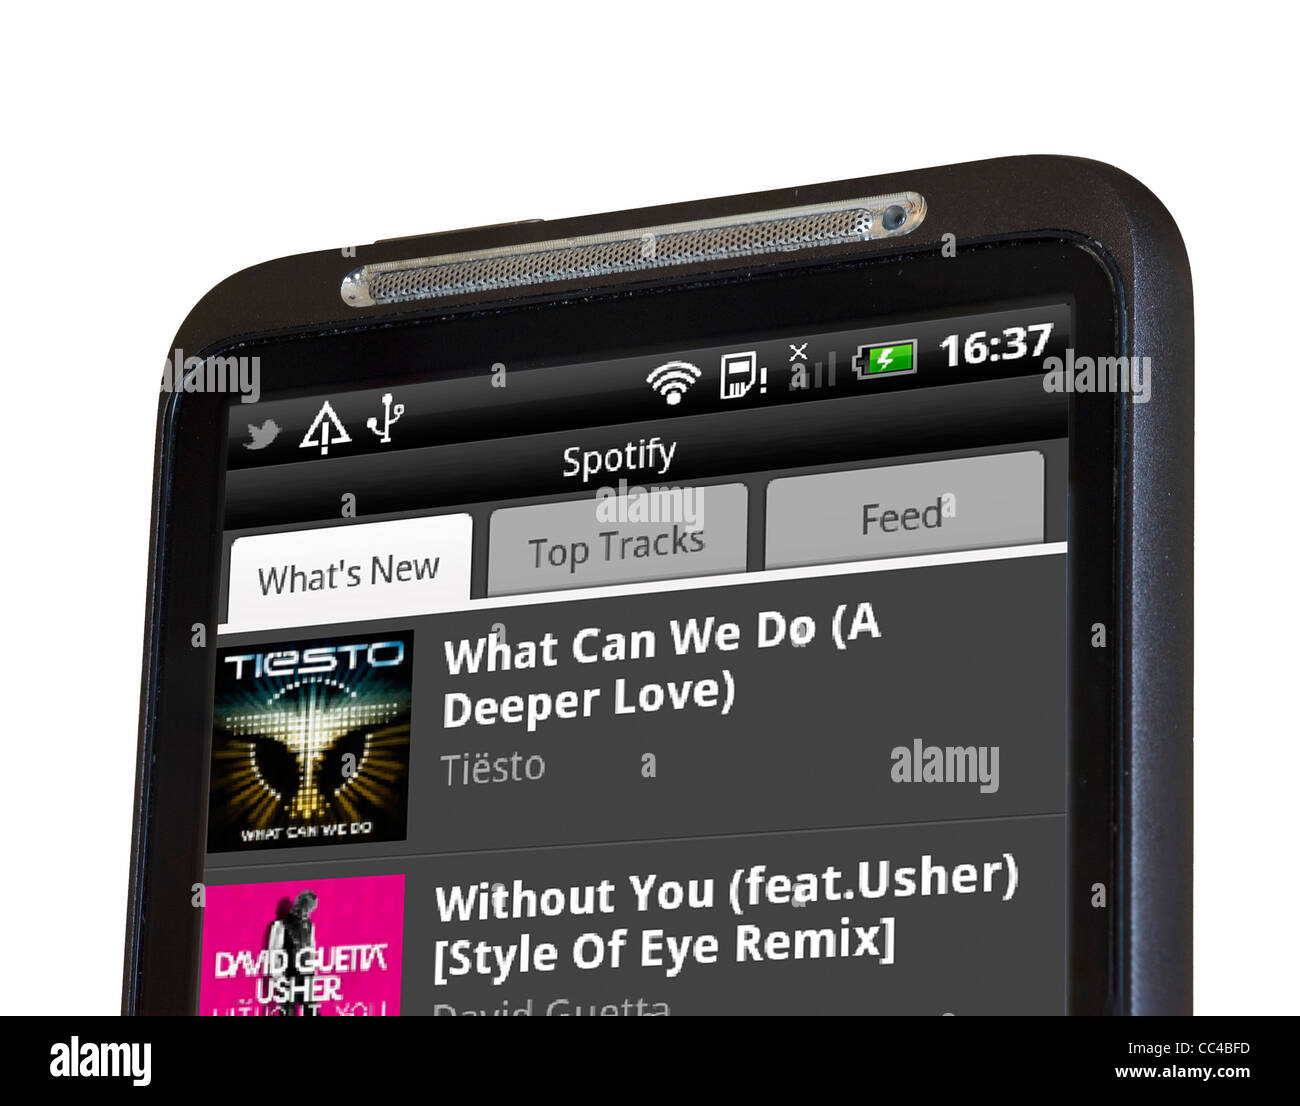 The internet music site Spotify on an HTC smartphone Stock Photo